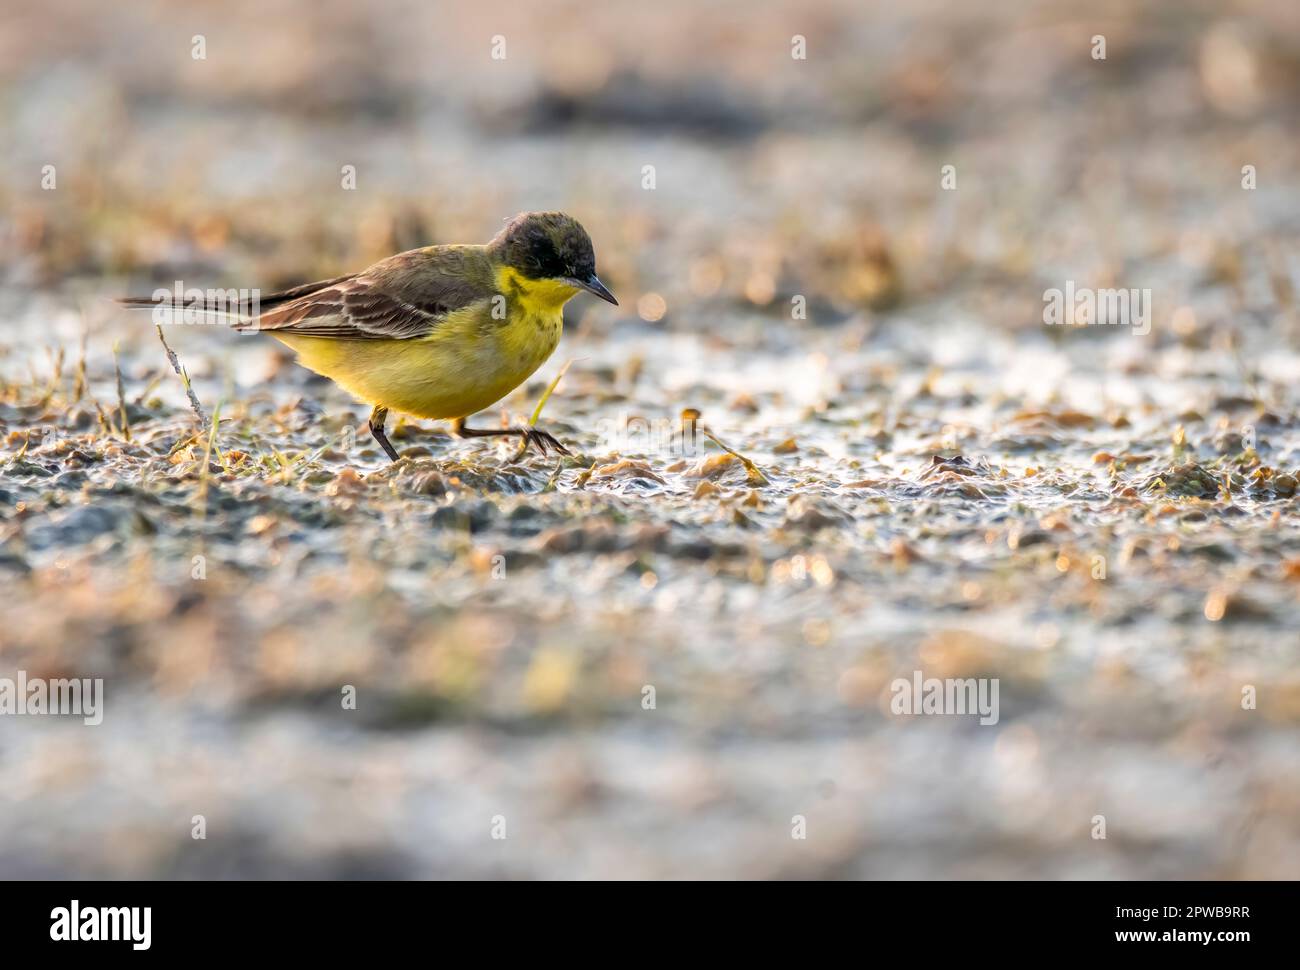 A western yellow wagtail wading through a marshy area inside wild ass sanctuary in lesser rann of kutch inside Gujarat Stock Photo